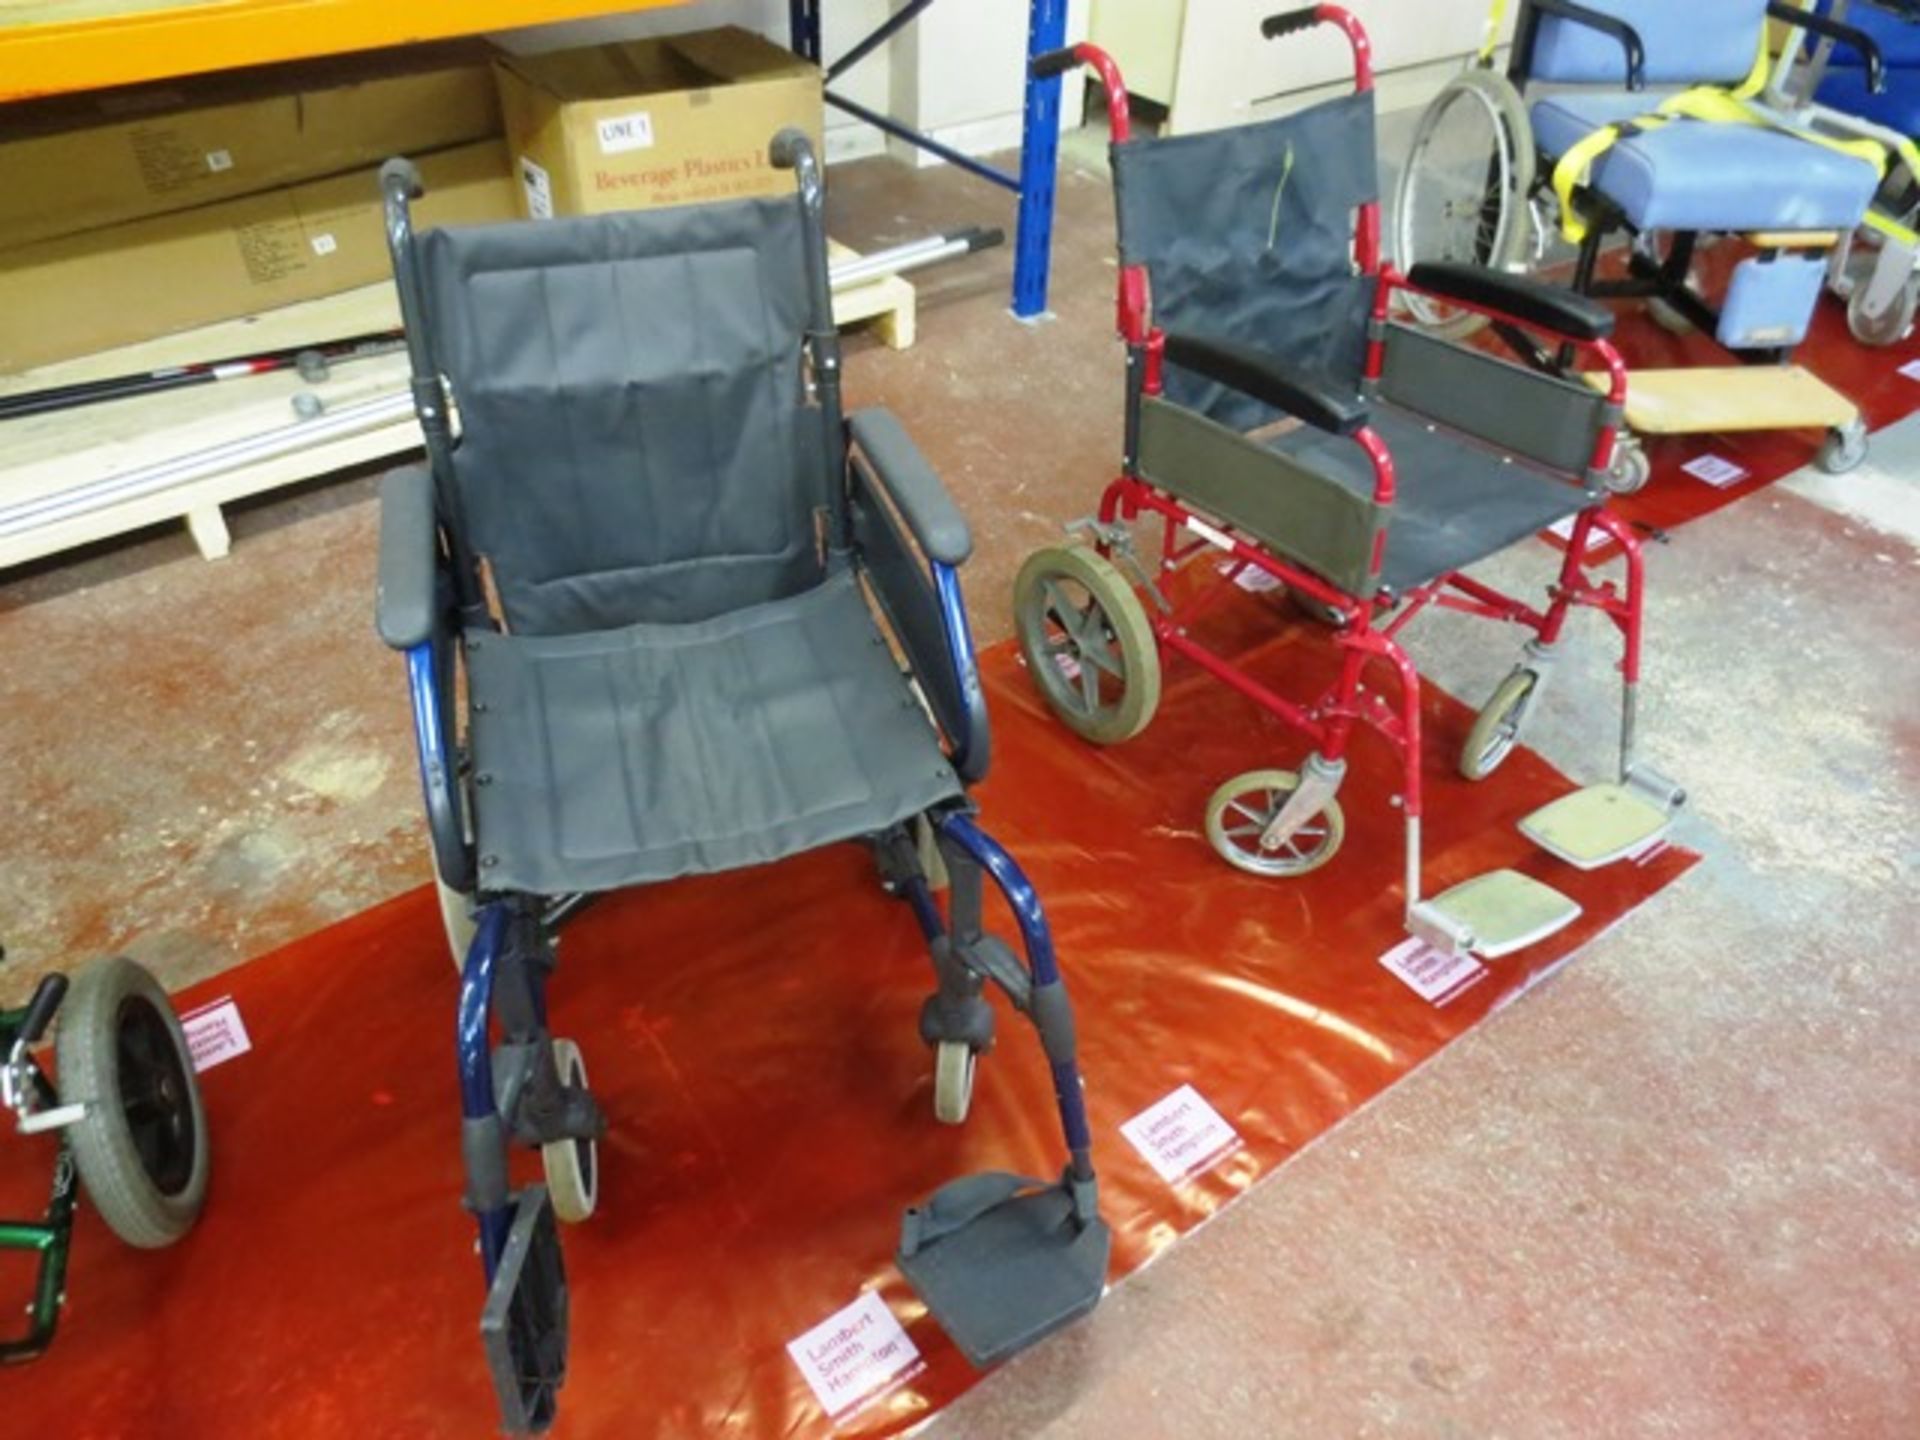 Sunrise Medical and Plus collapsible wheelchair